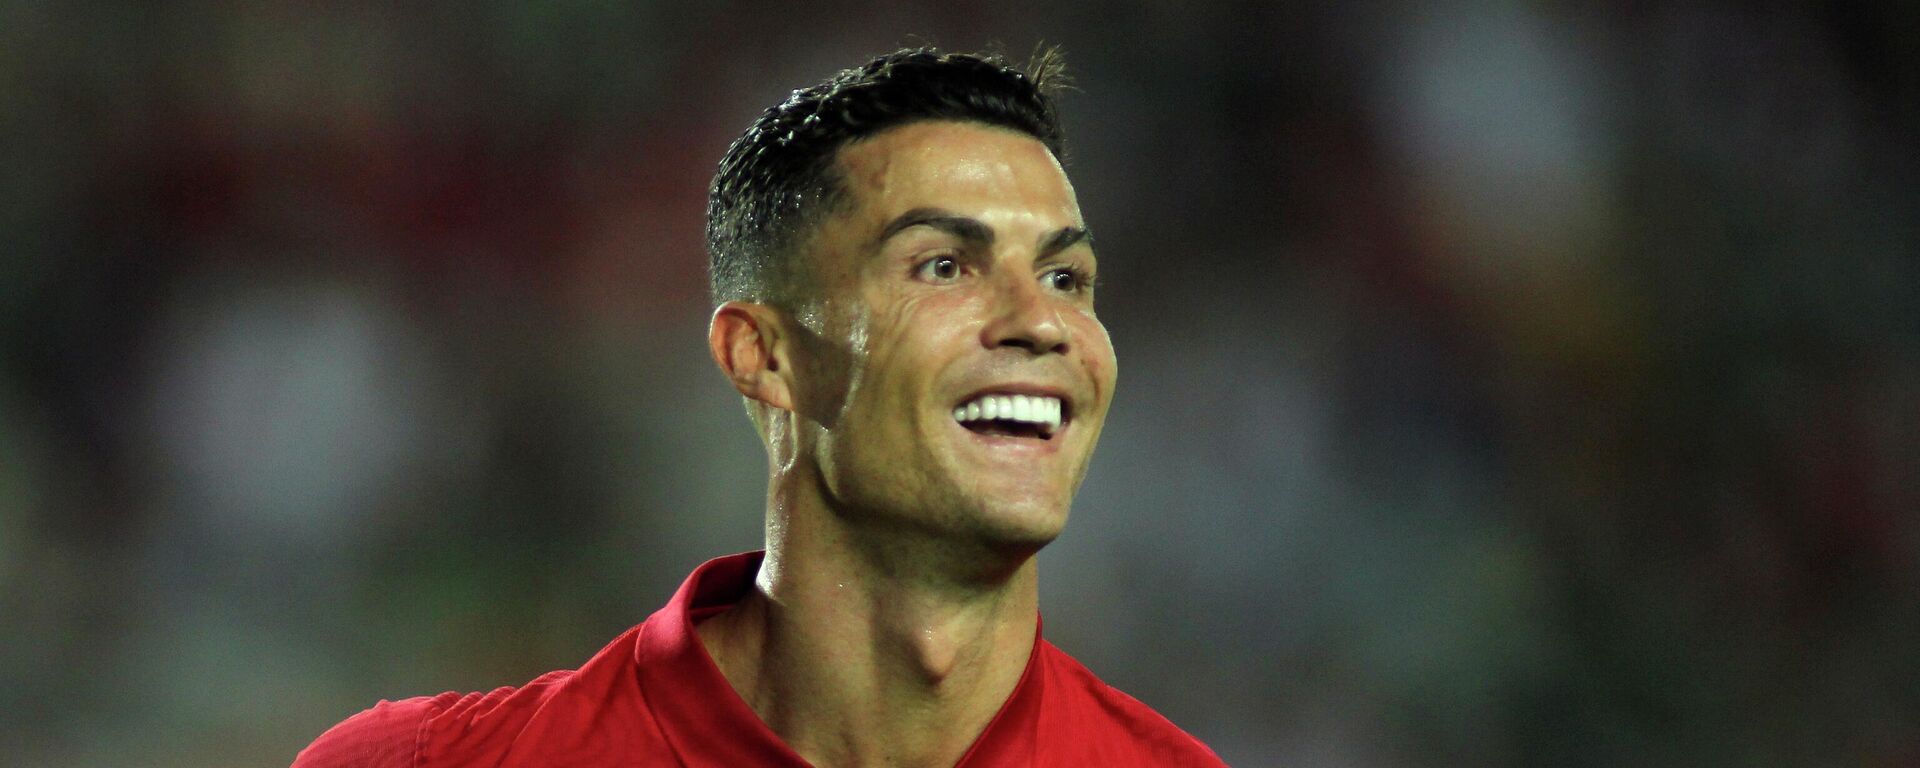 Portugal's Cristiano Ronaldo smiles after scoring the opening goal during the international friendly soccer match between Portugal and Qatar at the Algarve stadium outside Faro, Portugal, Saturday, Oct. 9, 2021 - Sputnik International, 1920, 24.11.2022